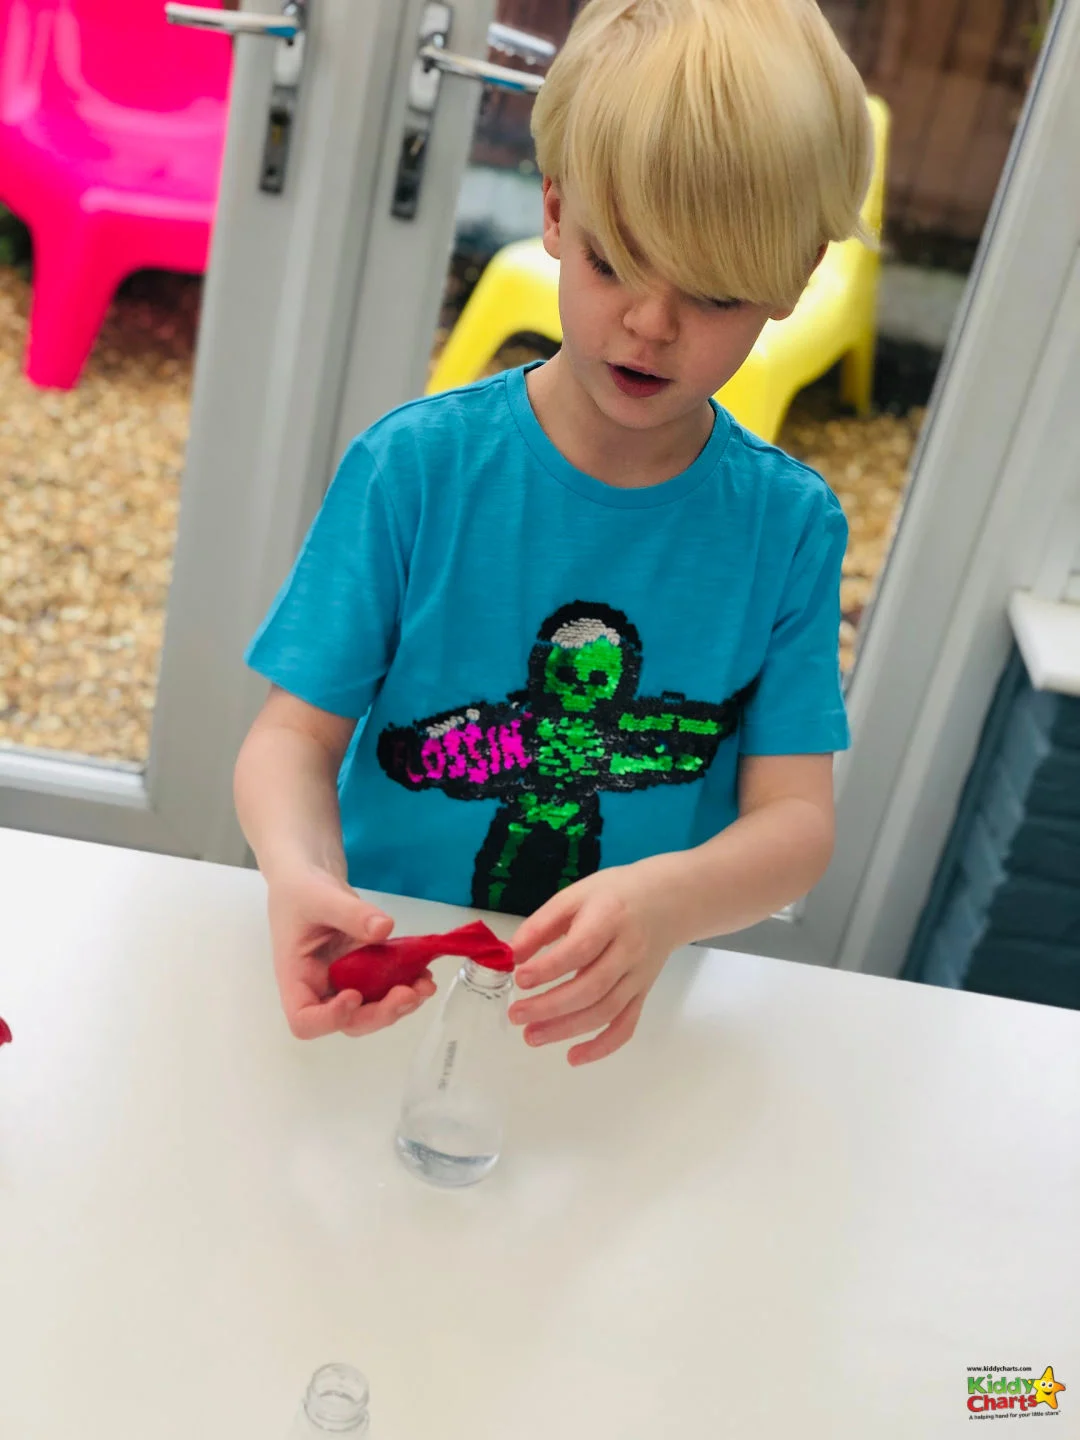 science experiment for kids